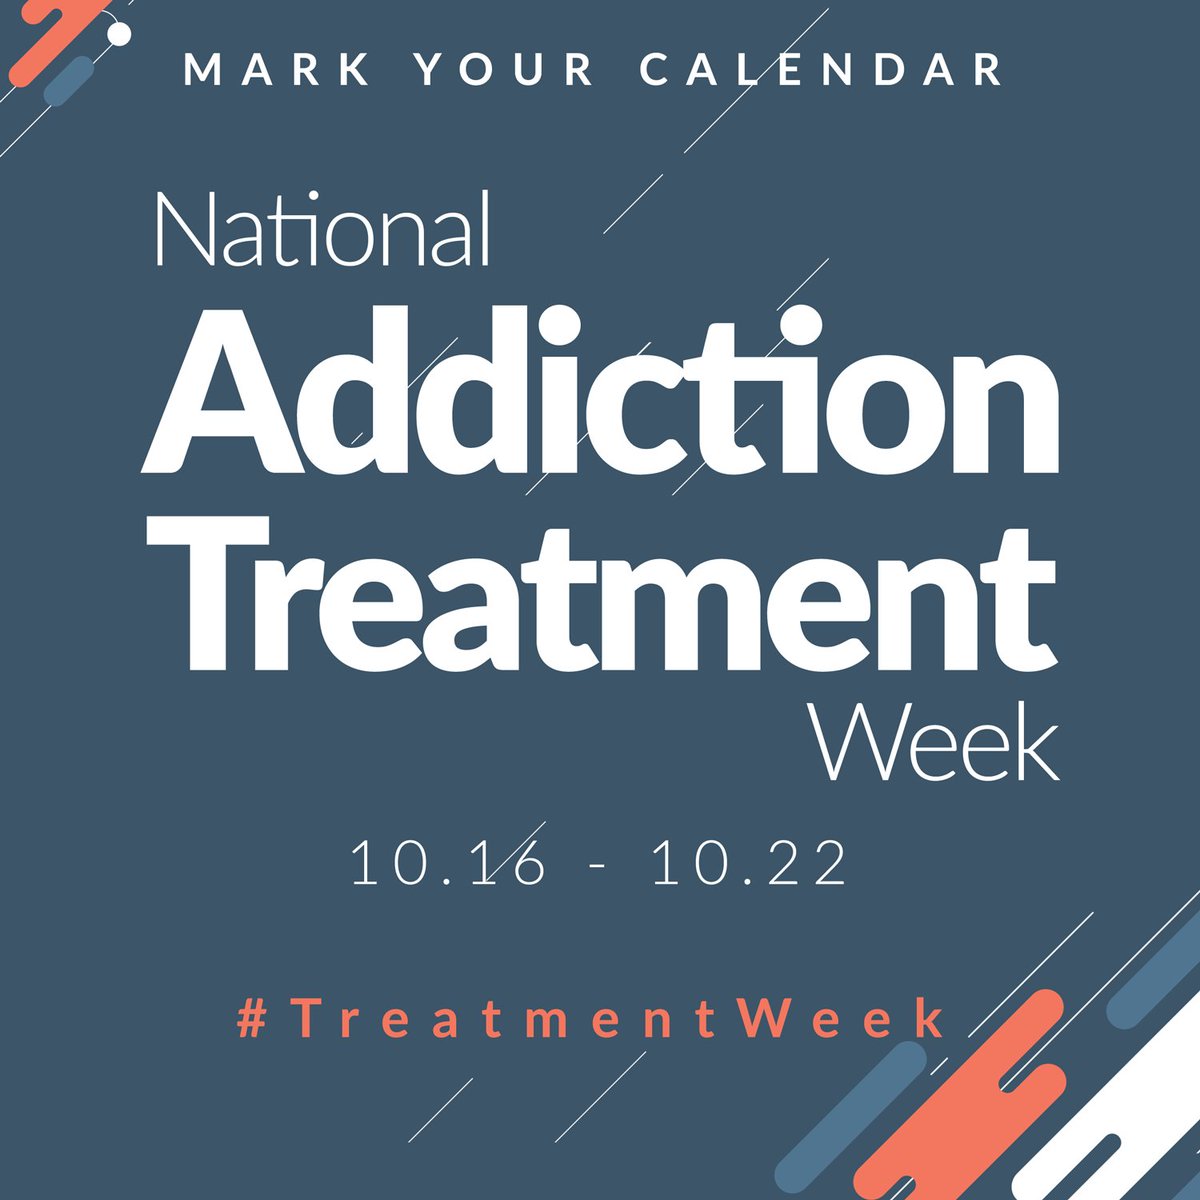 Save the date! Join us for National Addiction Treatment Week 2023, running from Oct. 16 to Oct.
22! Let's inspire change, reduce stigma, and celebrate recovery. #TreatmentWeek
#RecoveryMatters